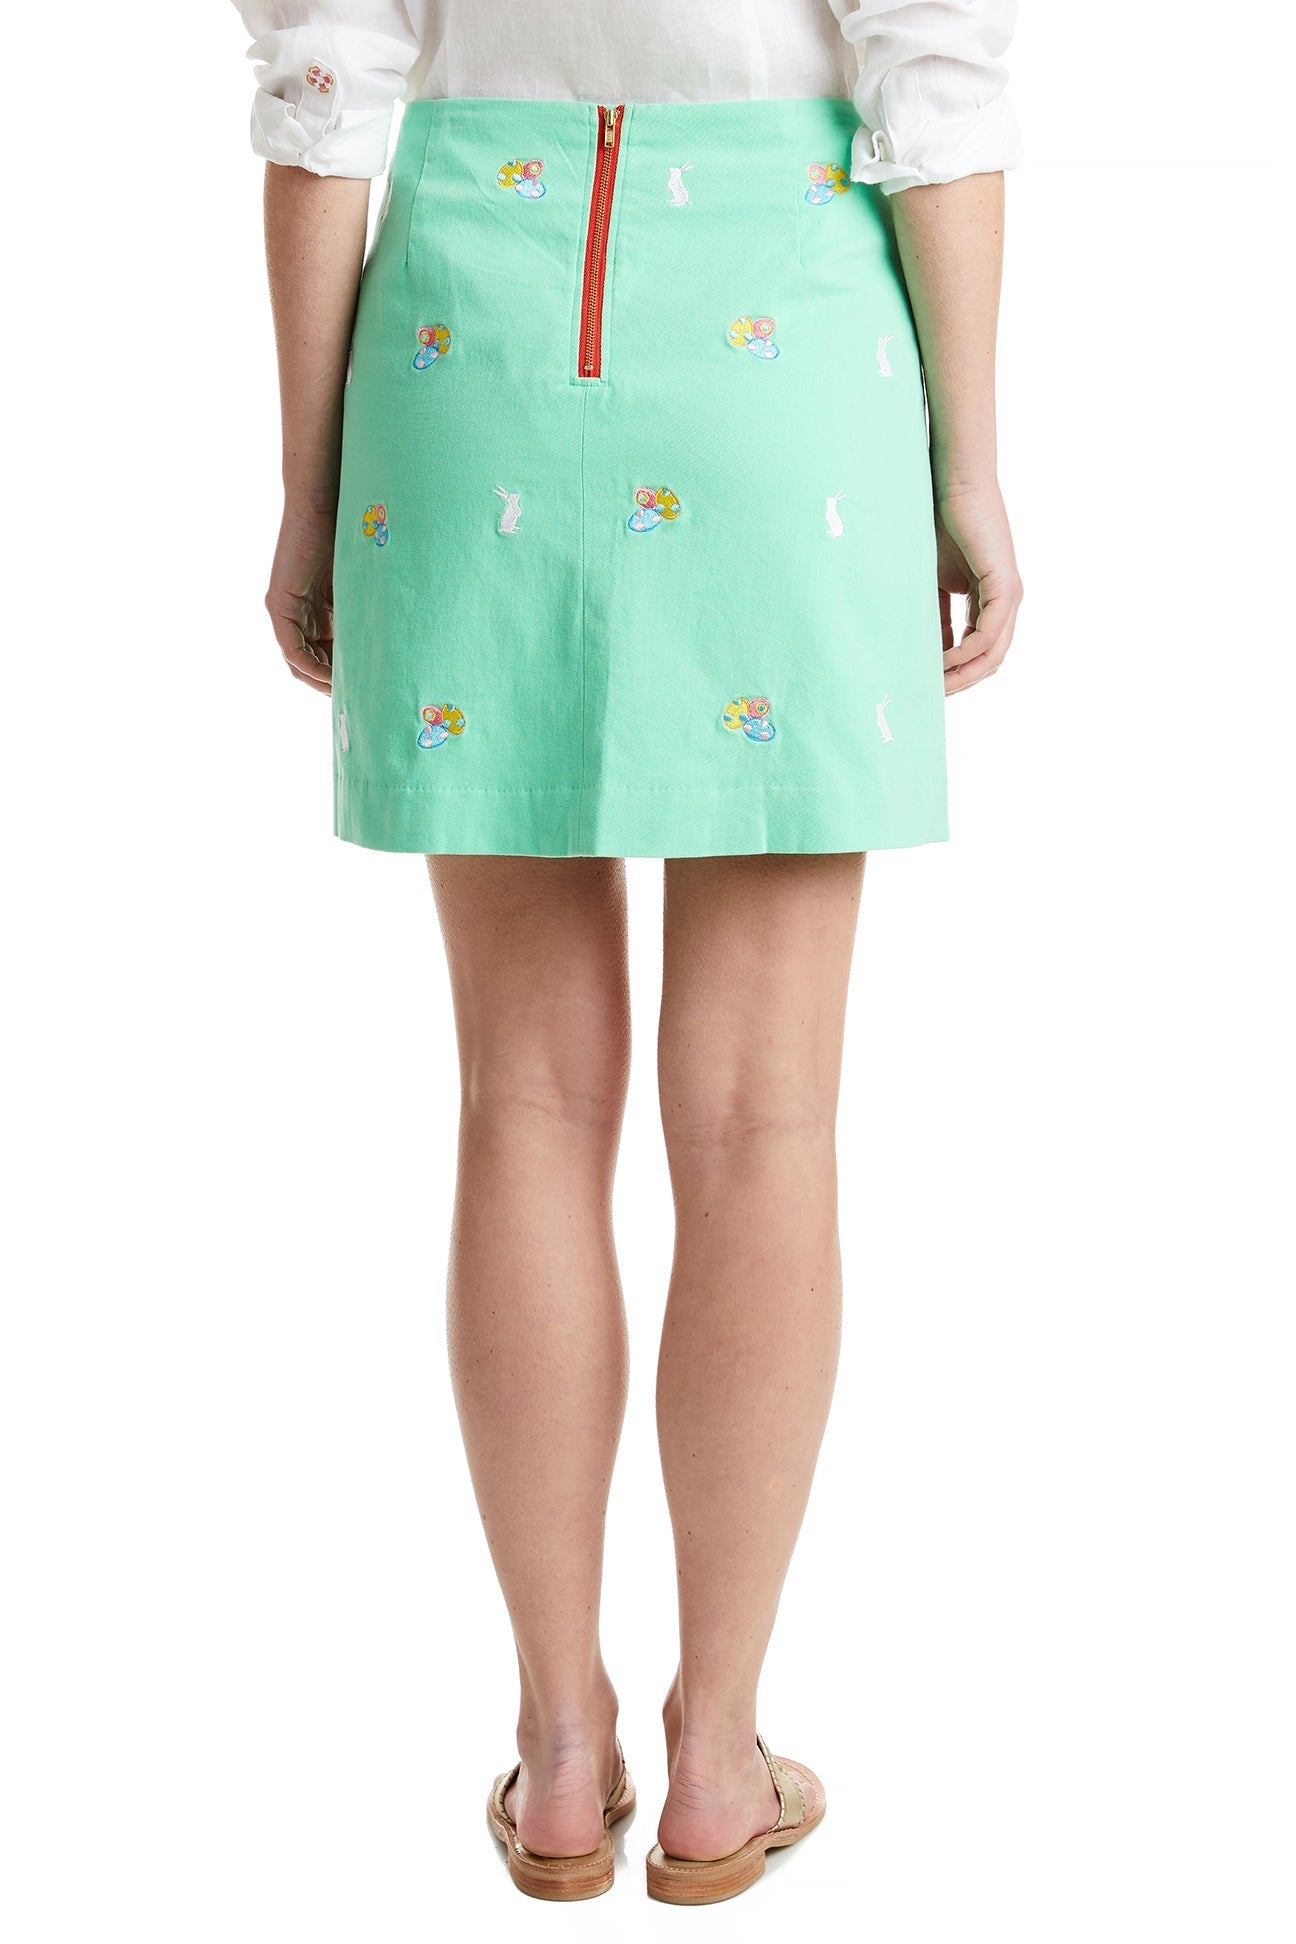 Ali Skirt Stretch Twill Spring Green with Easter Eggs and Bunny 19" LADIES SKIRTS Castaway Nantucket Island